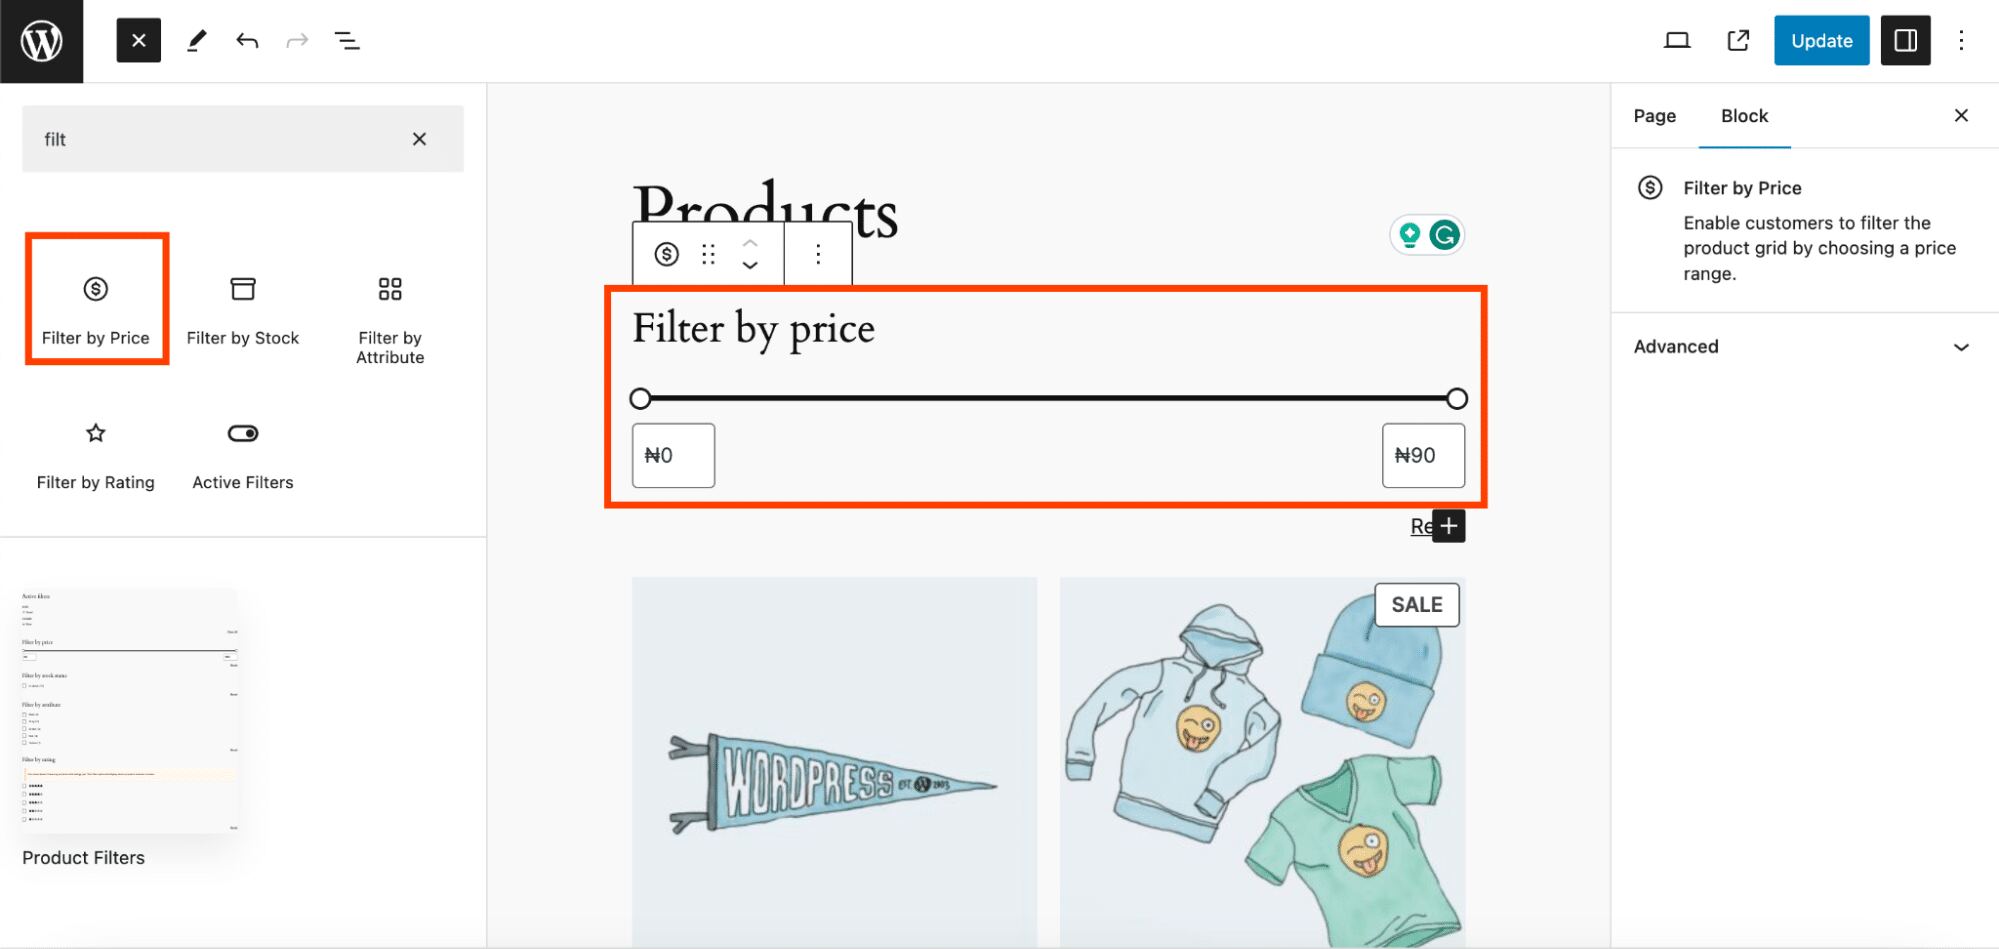 Adding a filter for price with the Filter by Price block